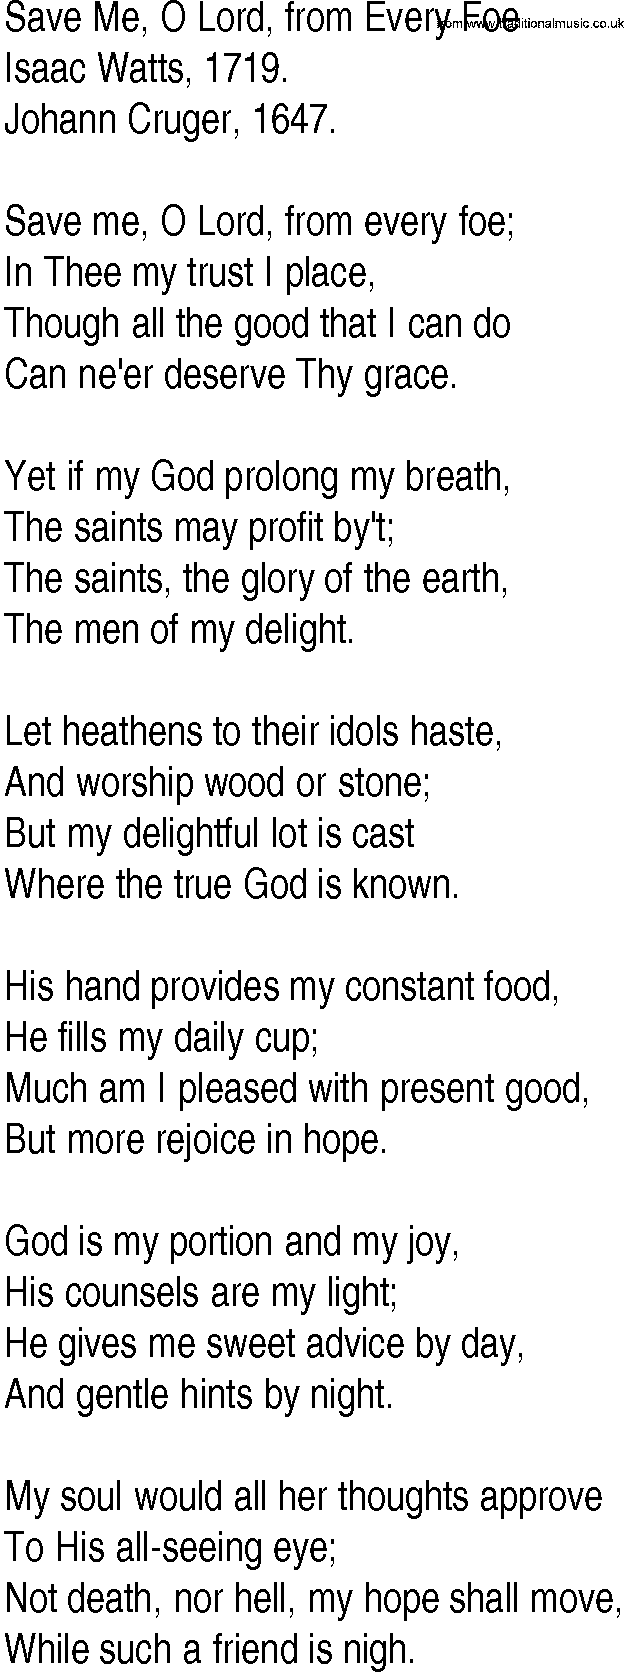 Hymn and Gospel Song: Save Me, O Lord, from Every Foe by Isaac Watts lyrics